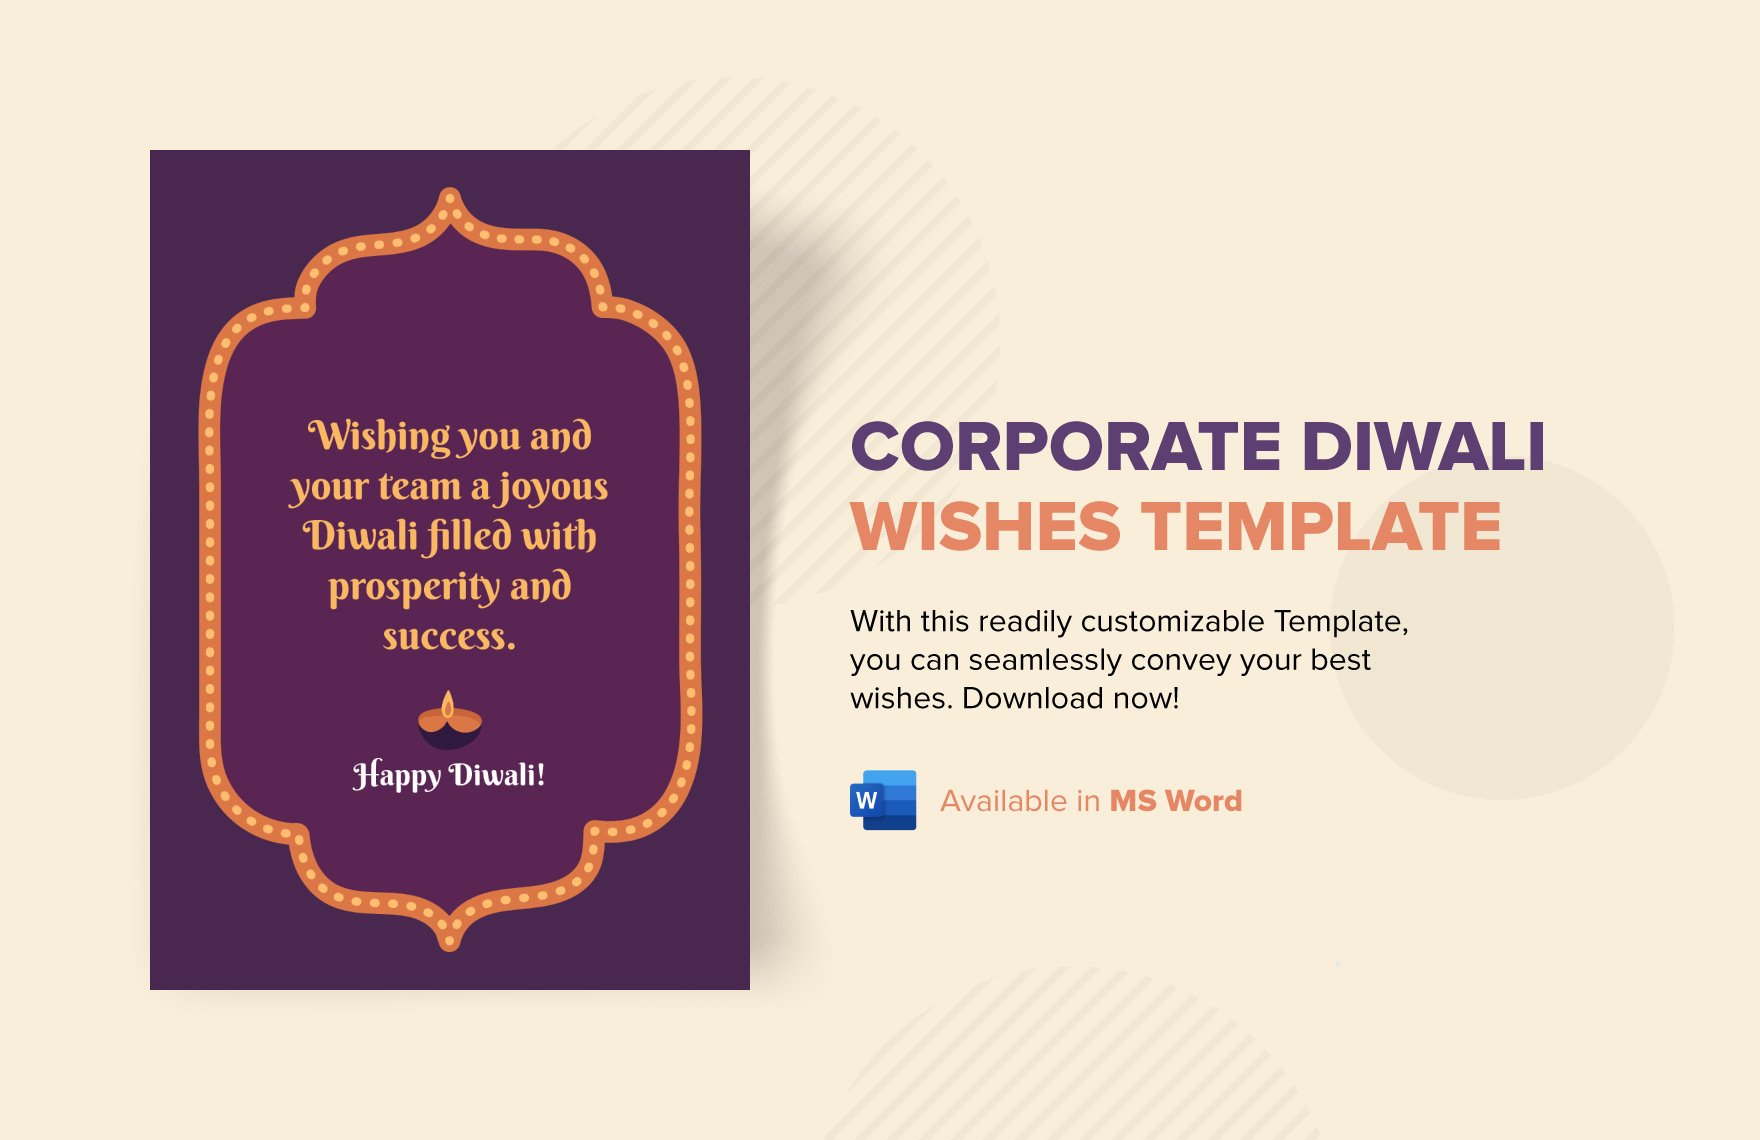 Corporate Diwali Wishes Template